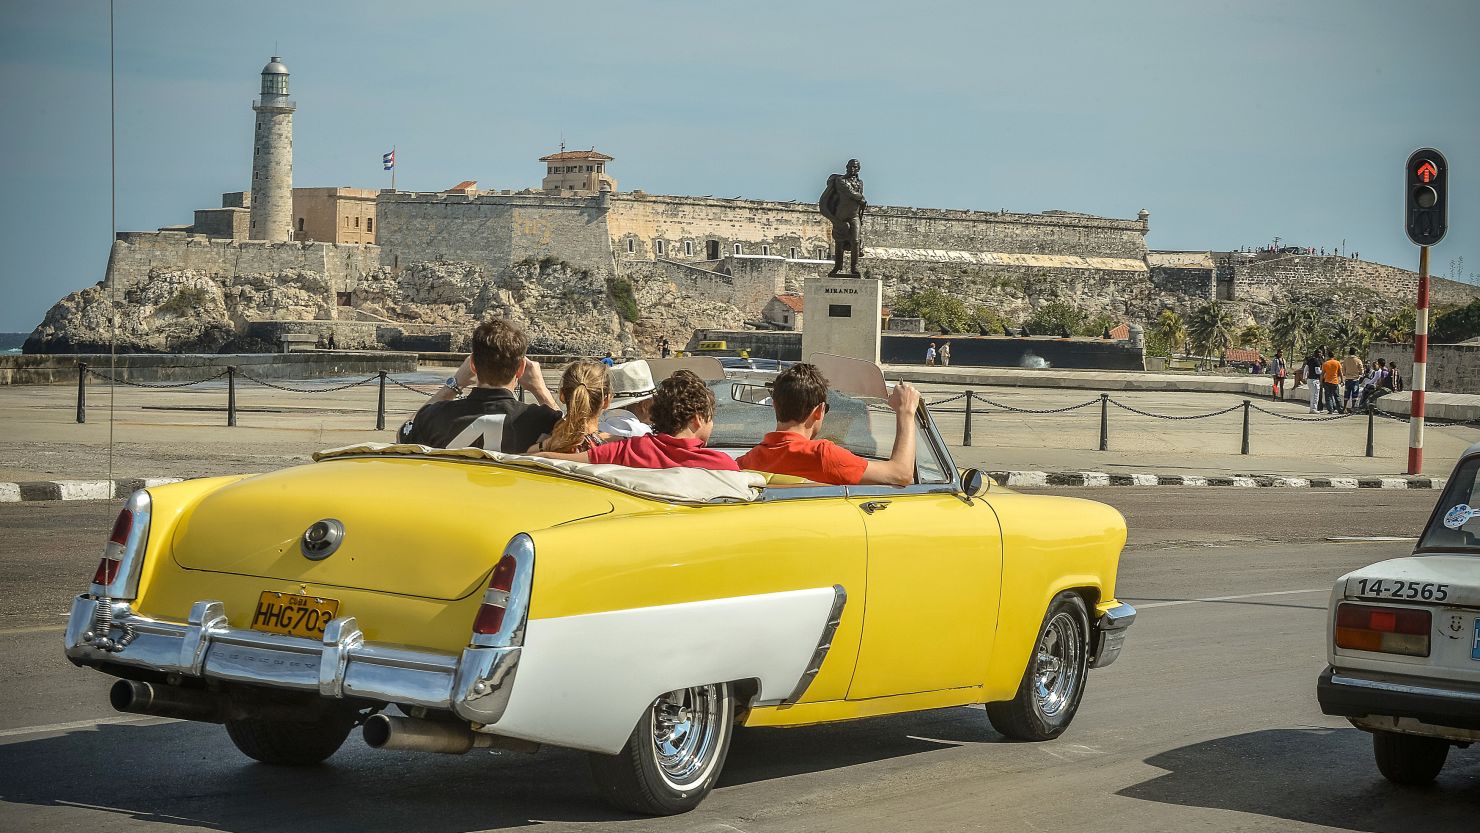 Tourists take a ride along the coast in Havana, which may become even harder for U.S. citizens and Cuban expats to reach after Cuba's government suspended all consular services to the United States on Tuesday.